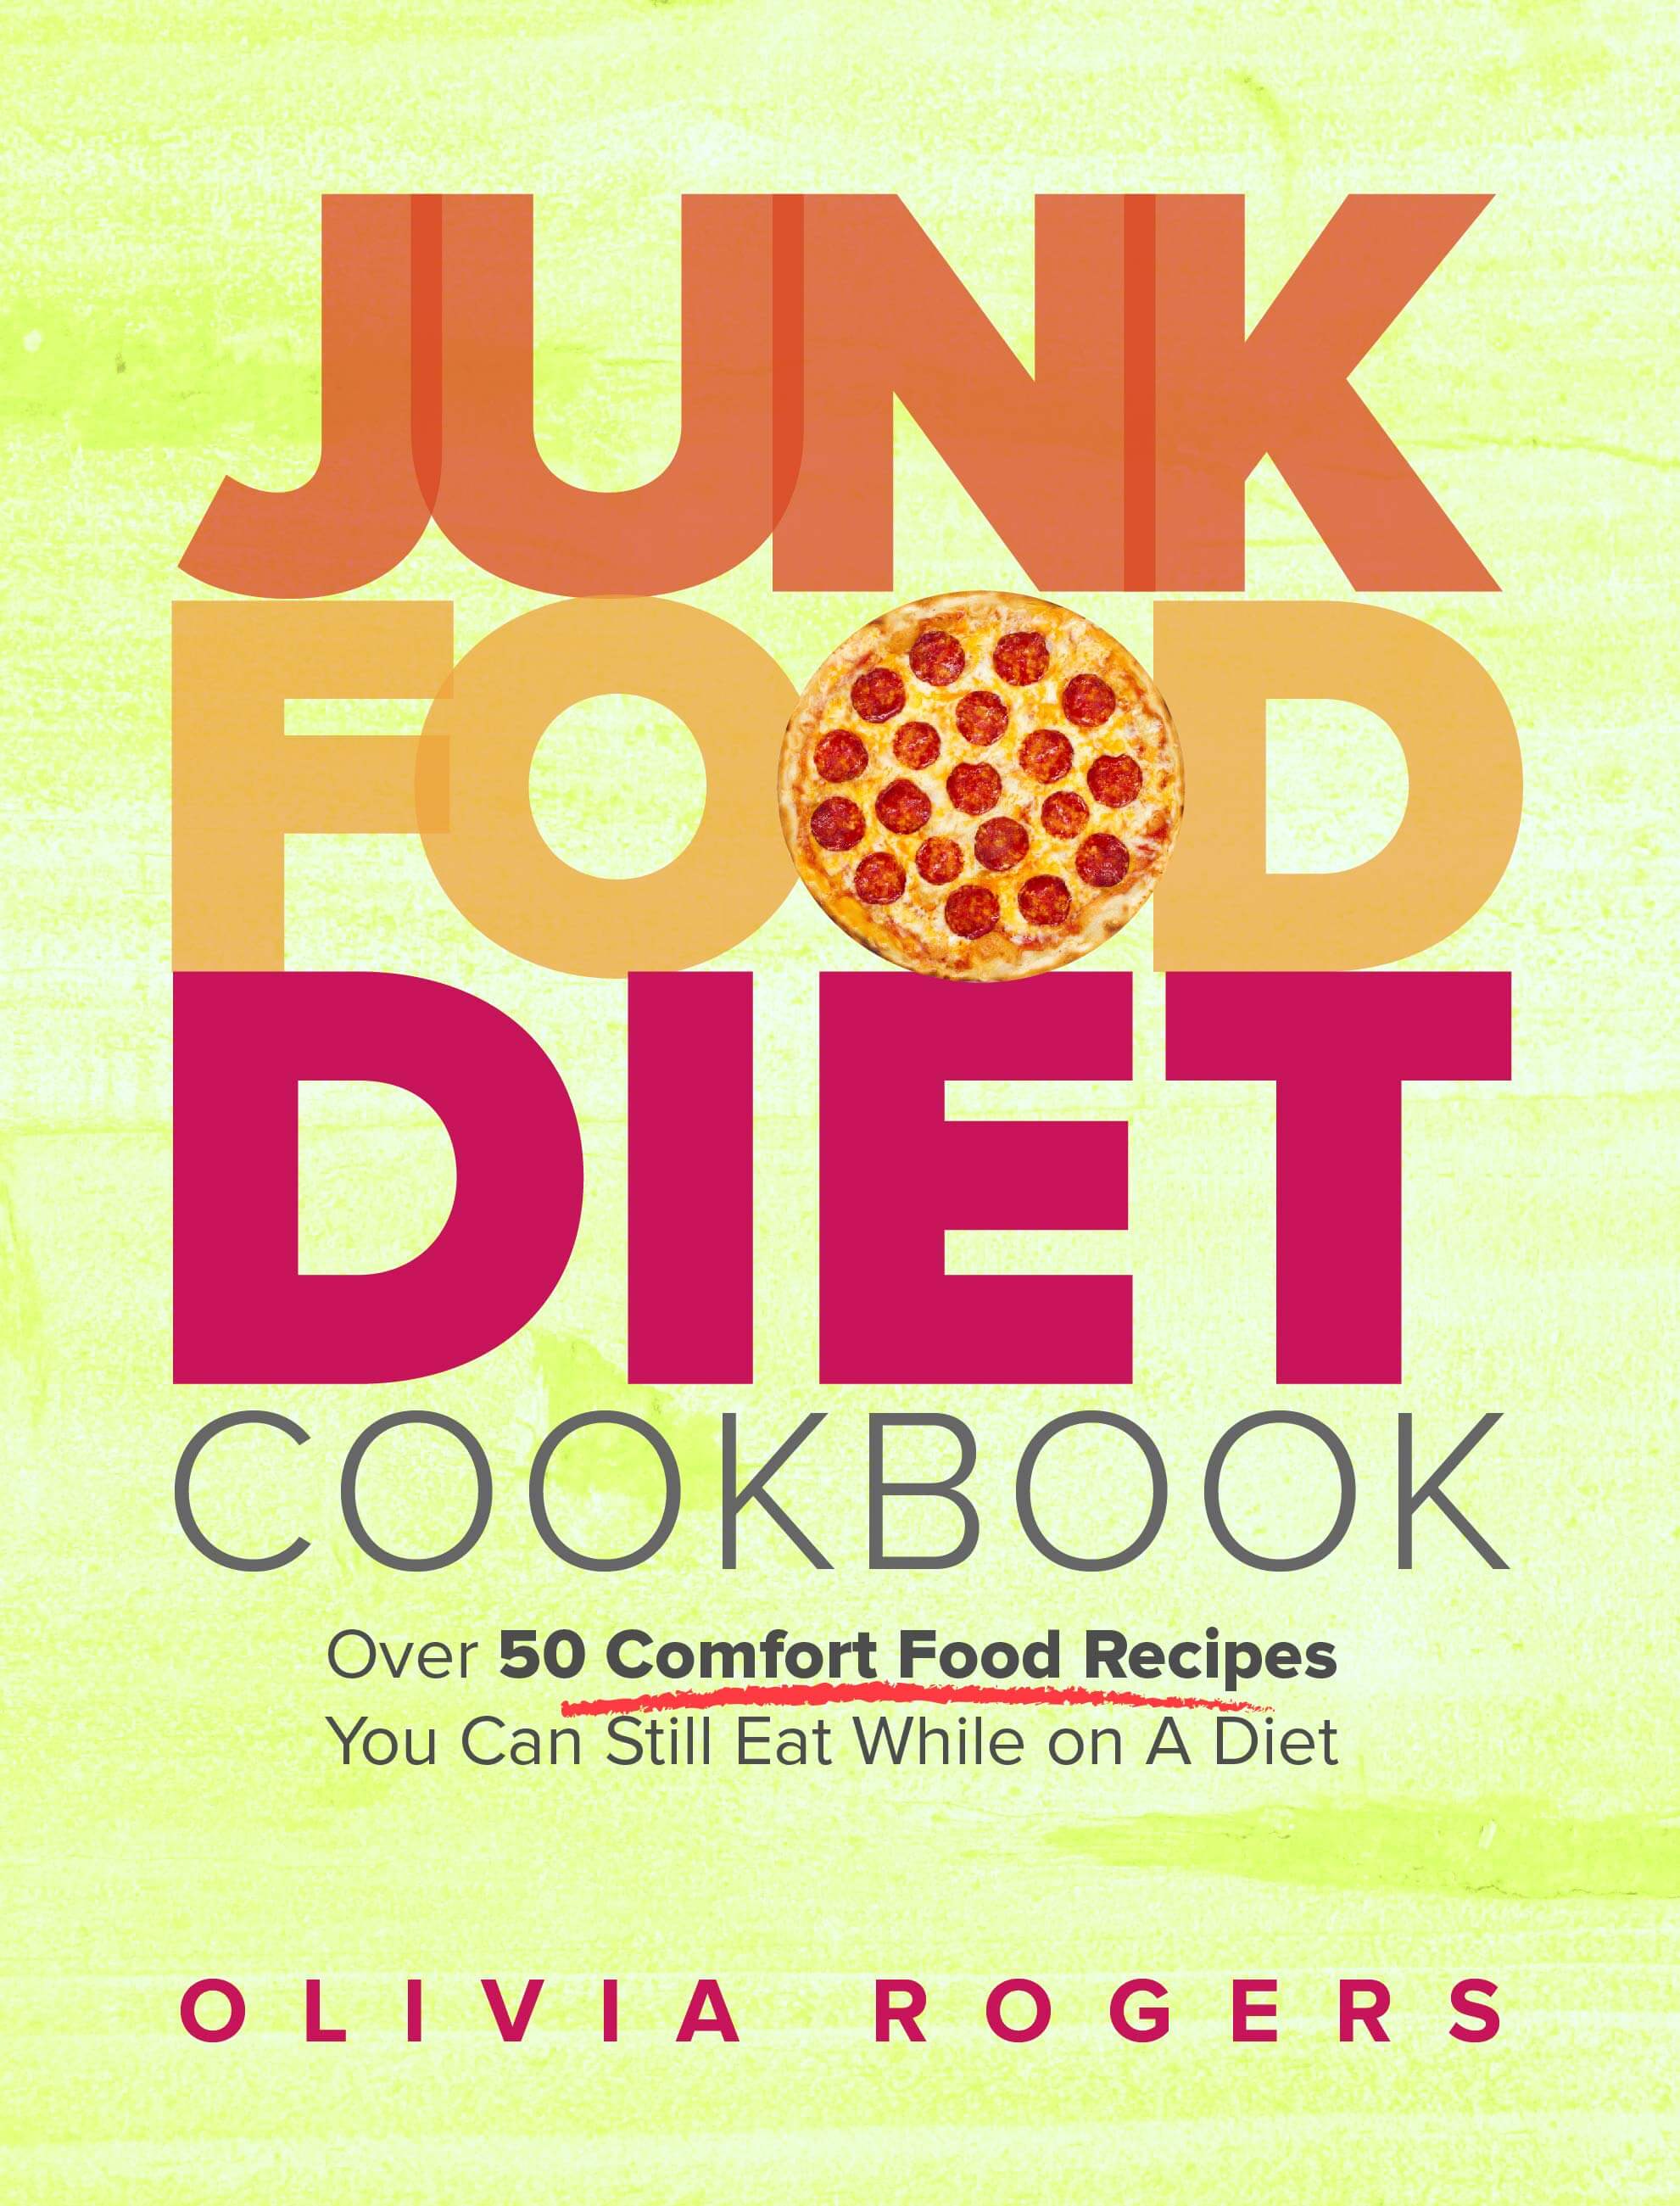 FREE: Junk Food Diet Cookbook: Over 50 Comfort Food Recipes You Can Still Eat While on A Diet by Olivia Rogers